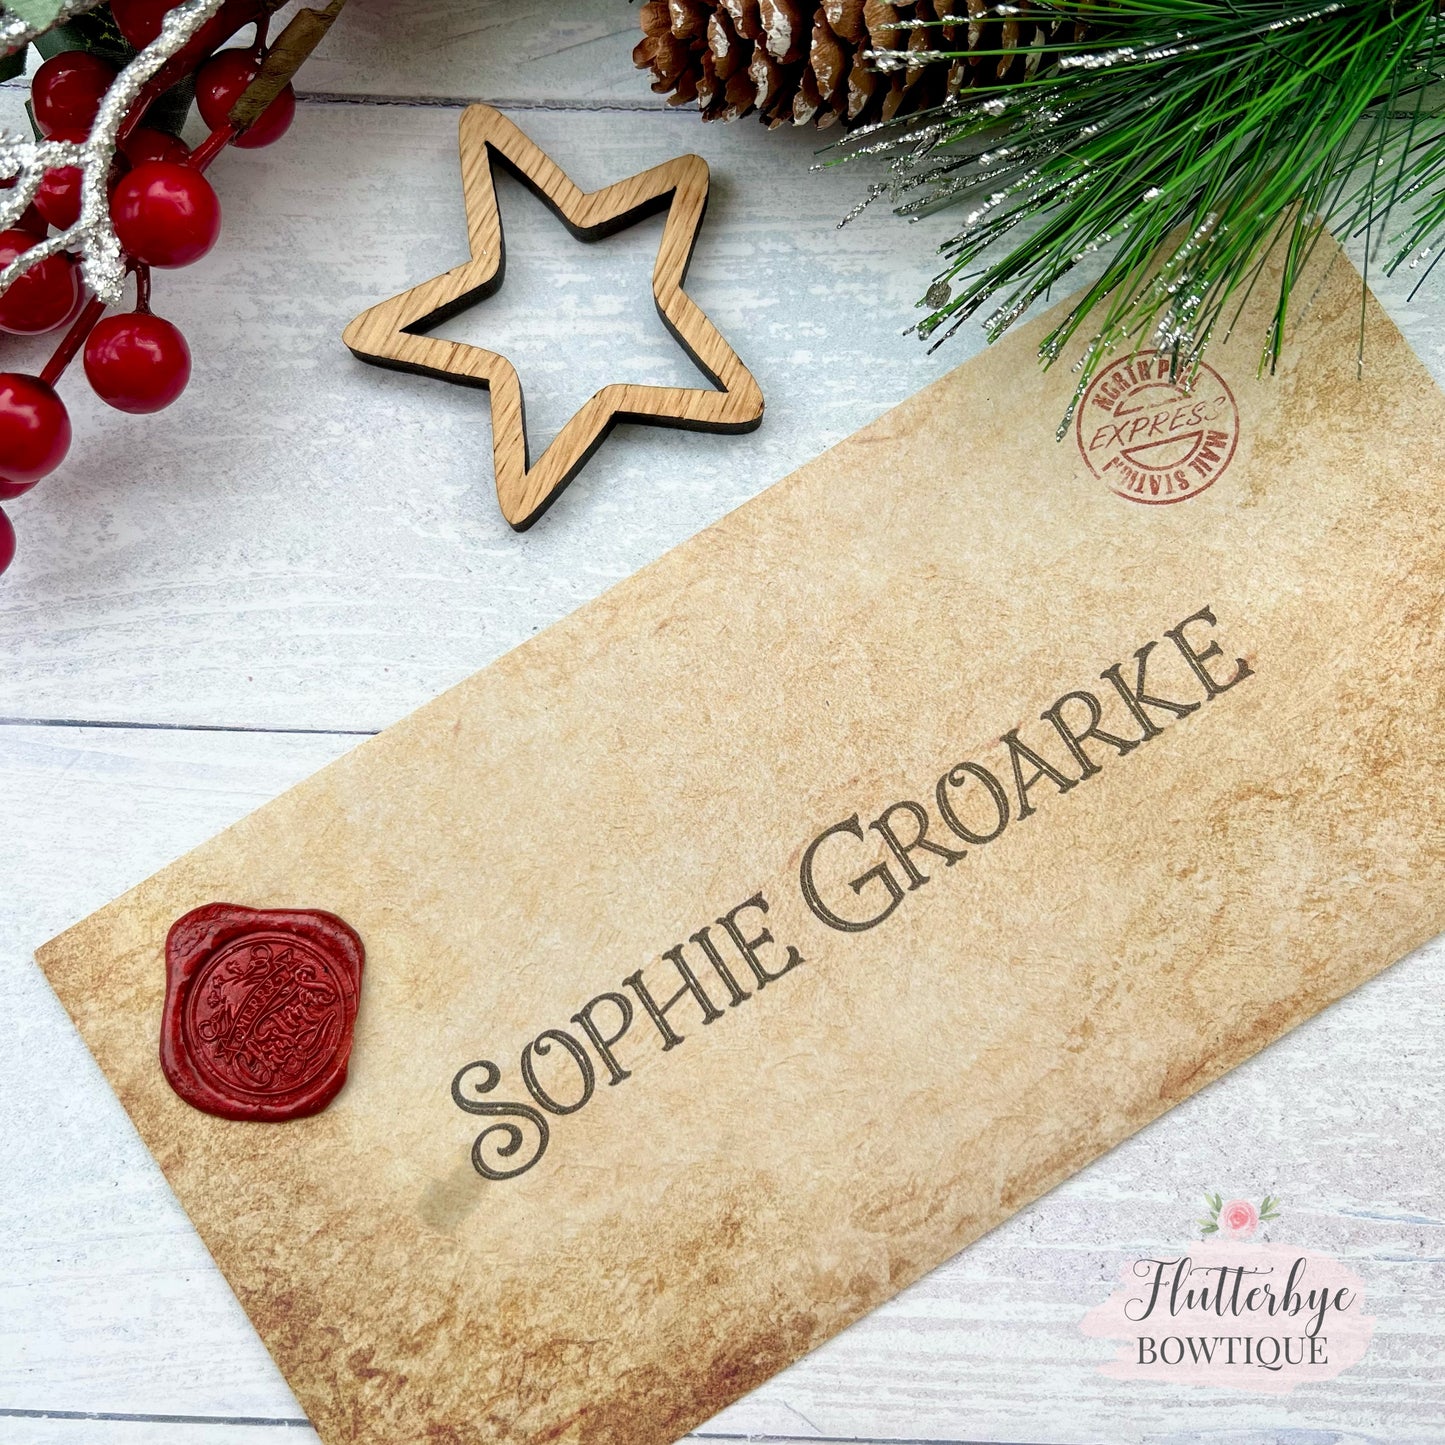 Personalised Santa Letter, Father Christmas Nice List